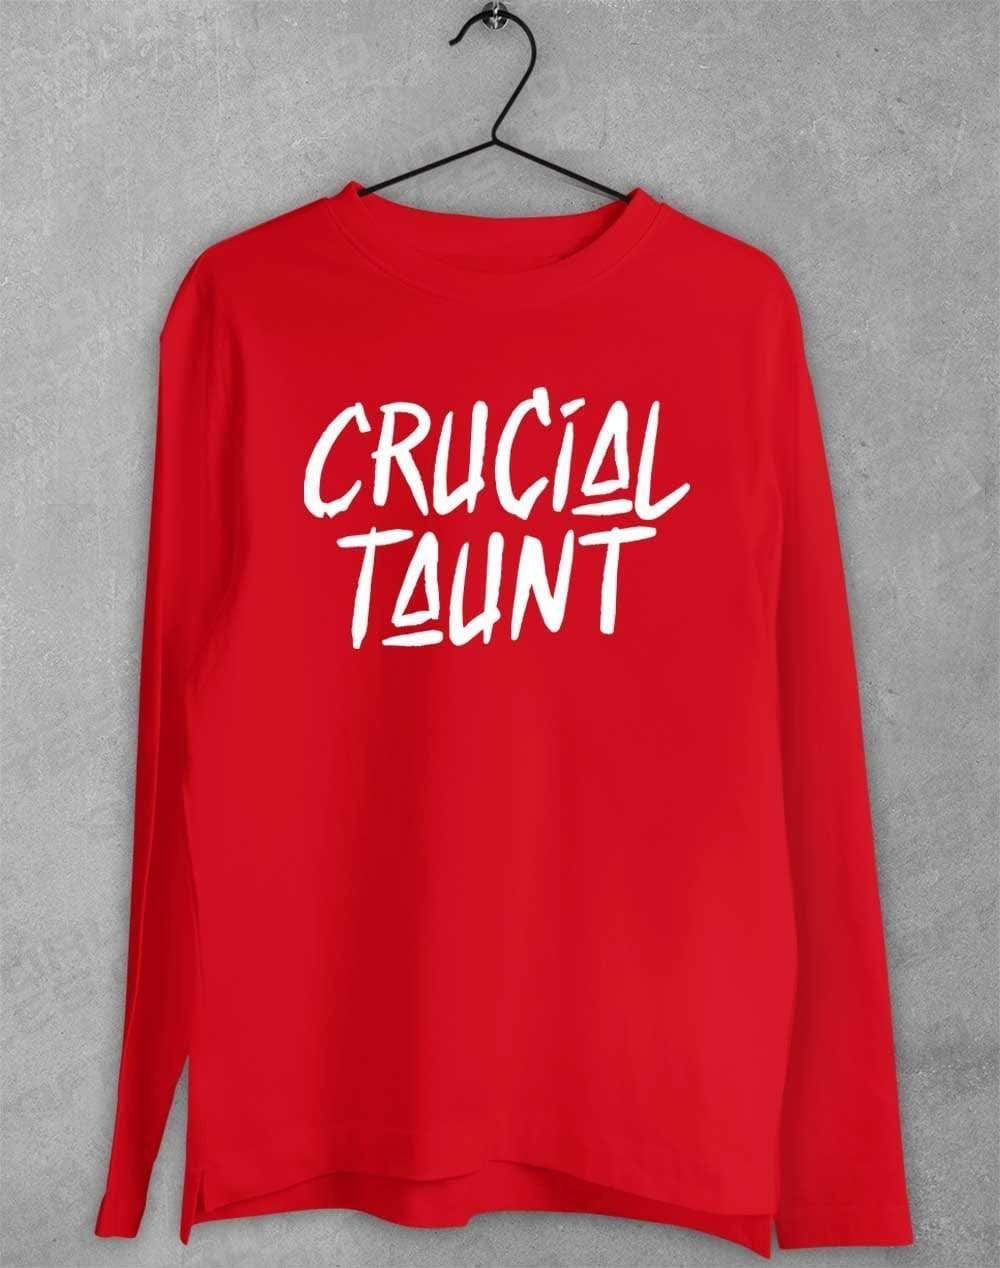 Crucial Taunt Long Sleeve T-Shirt S / Red  - Off World Tees